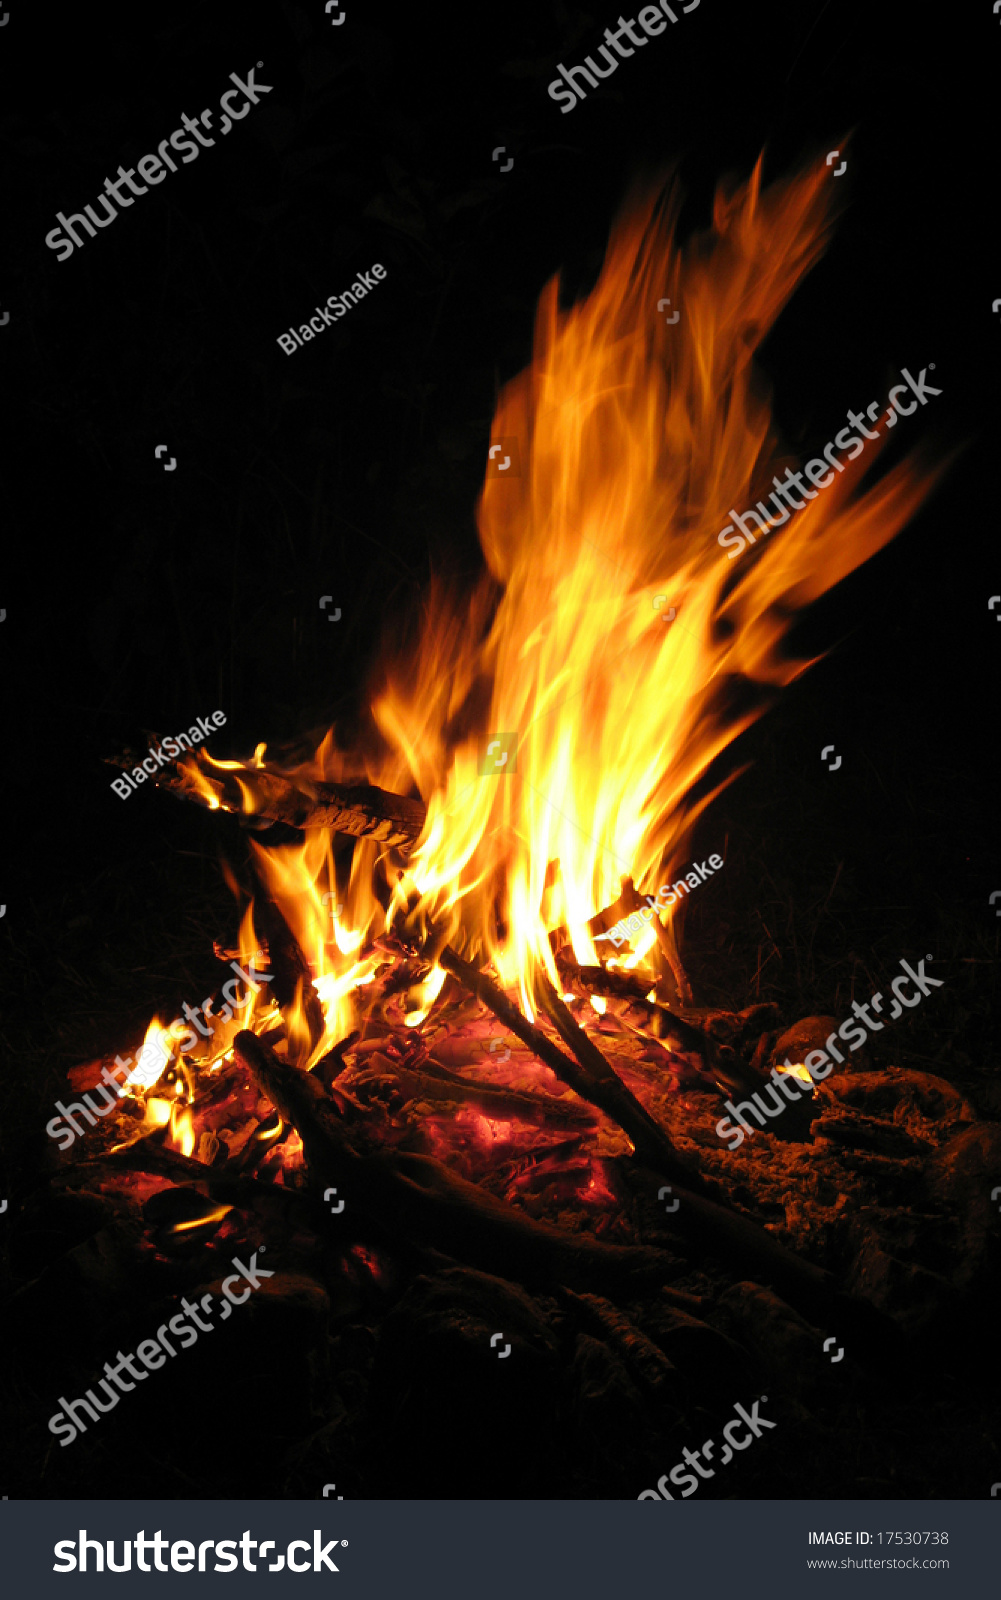 Fire Flame And Ember Stock Photo 17530738 : Shutterstock